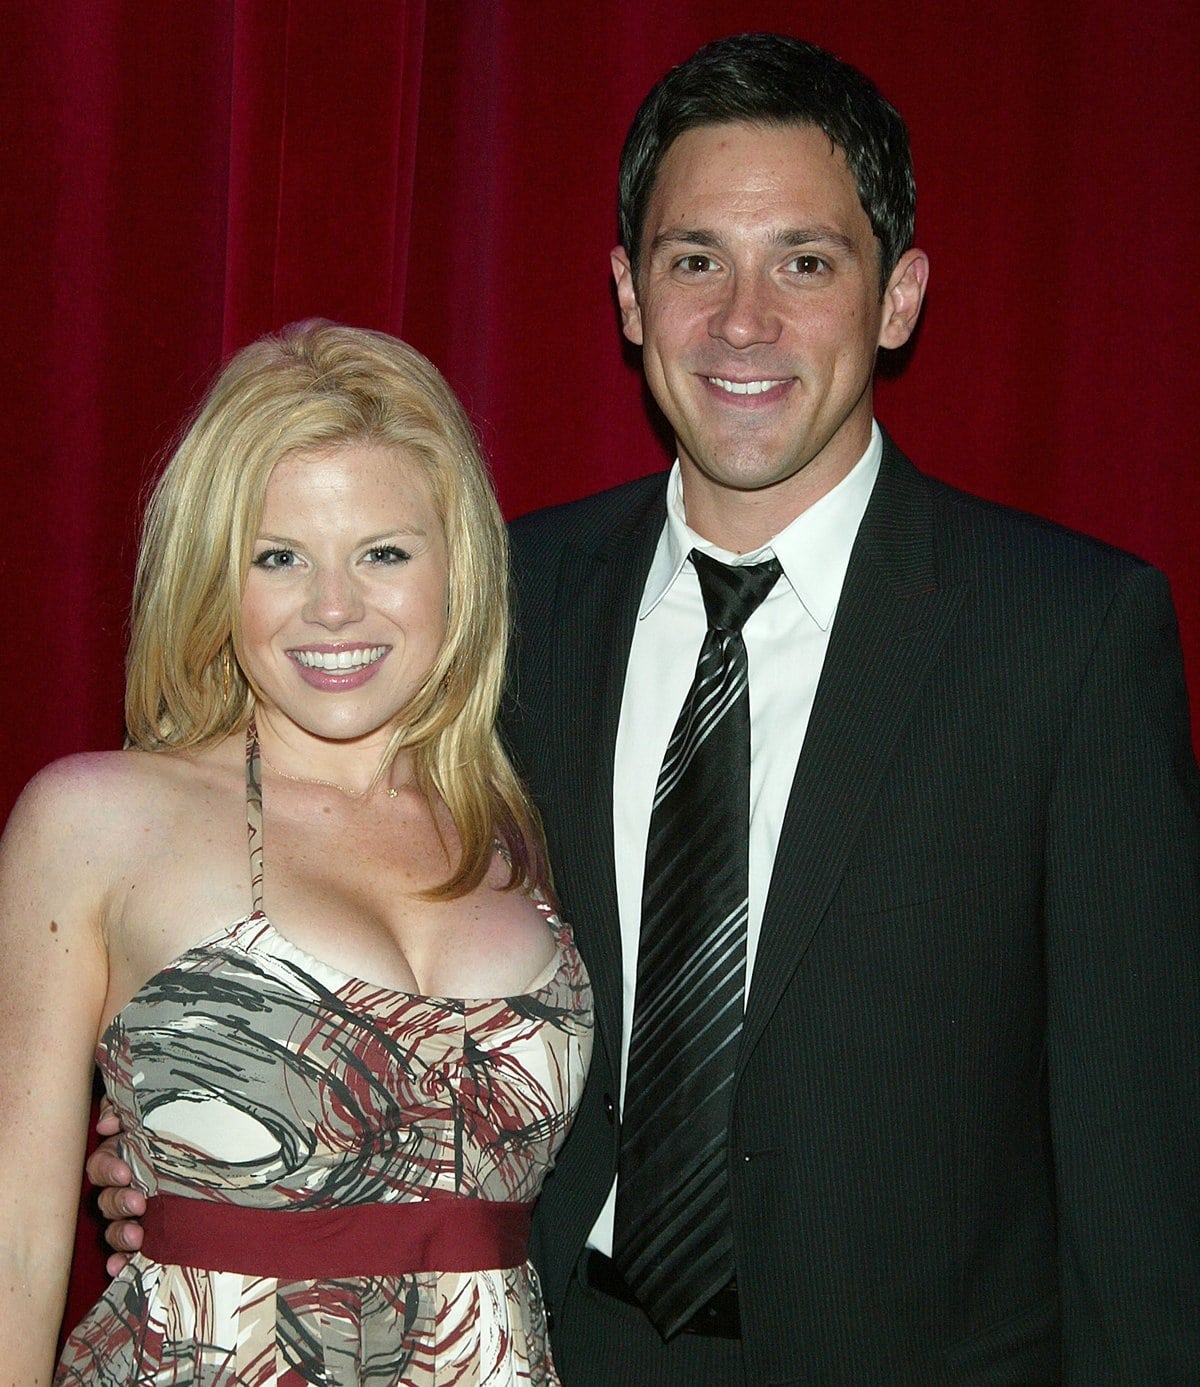 Steve Kazee and Megan Hilty split in 2012 after six years together